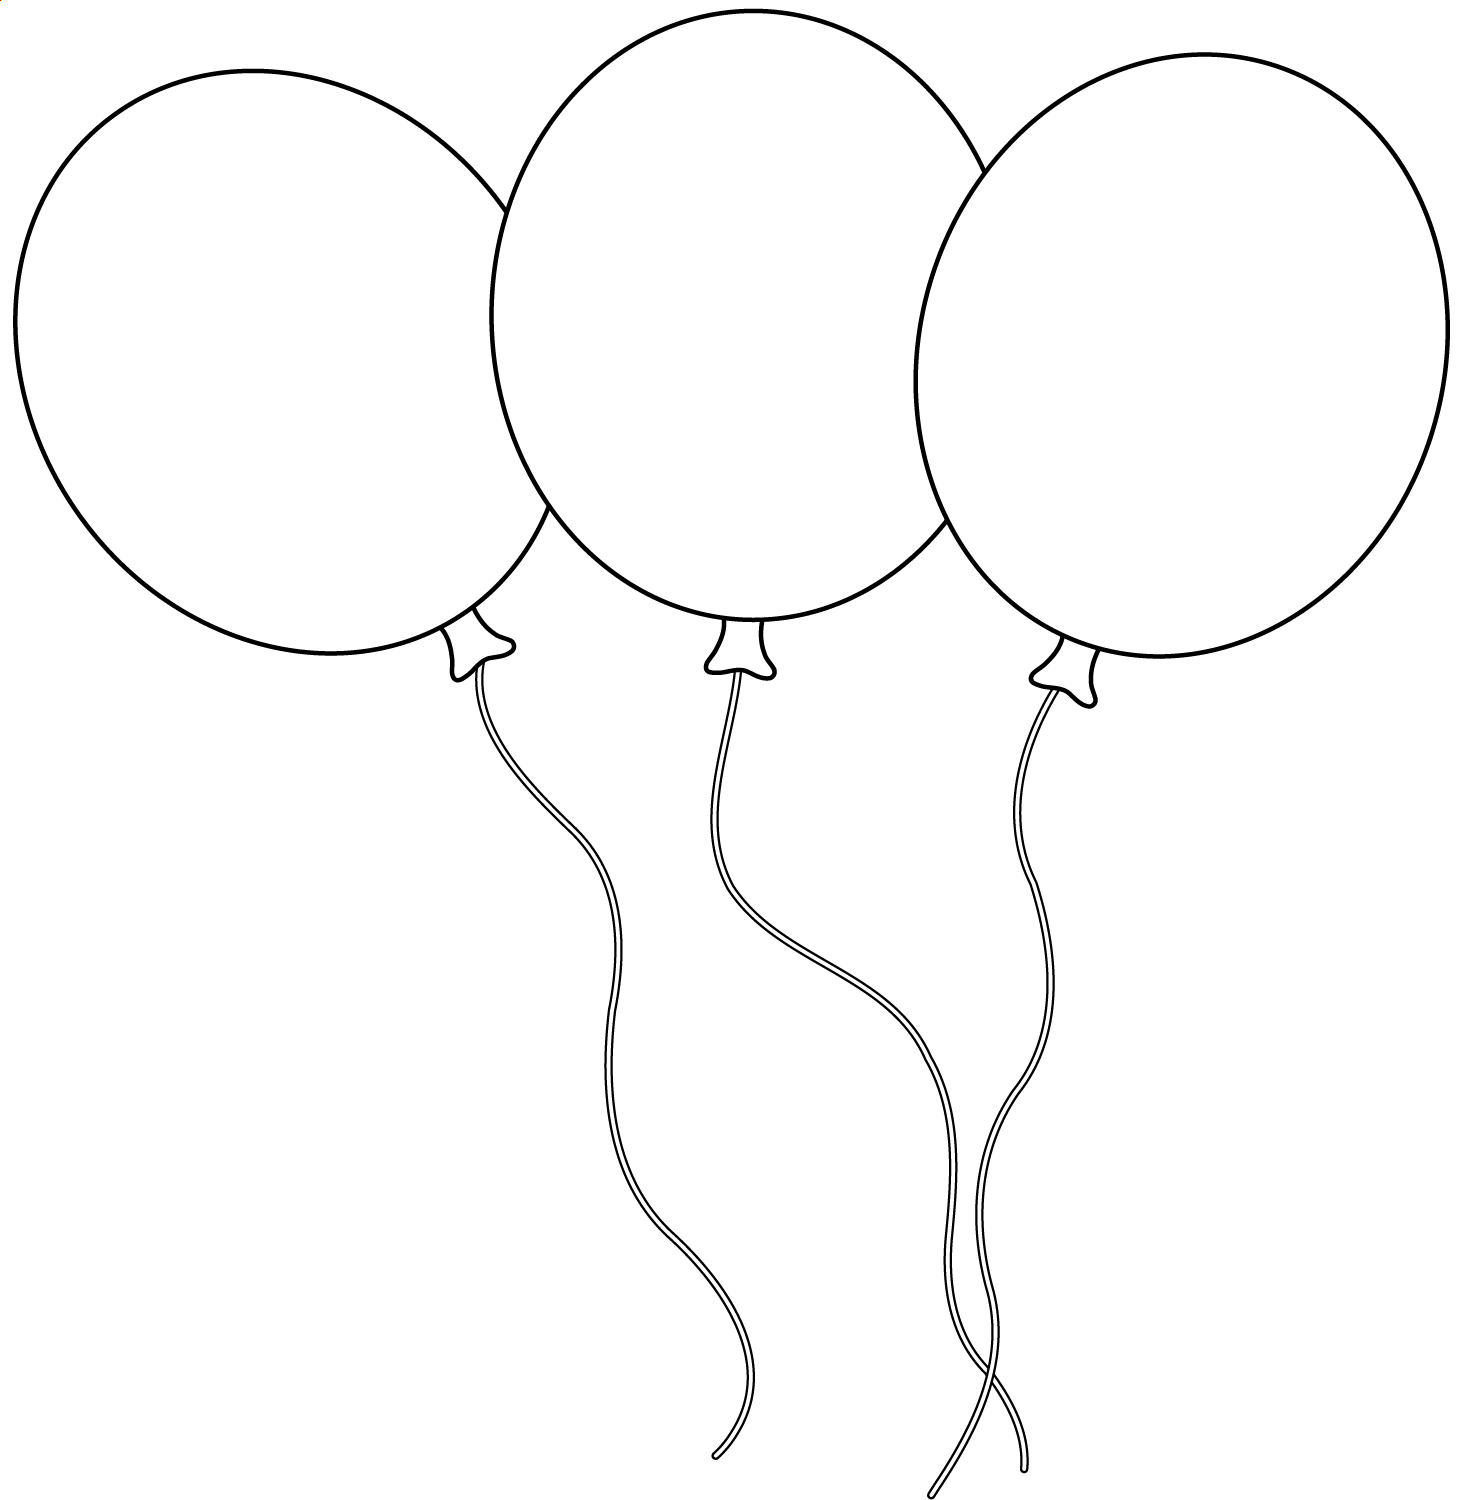 Nice Three Balloons Coloring Page